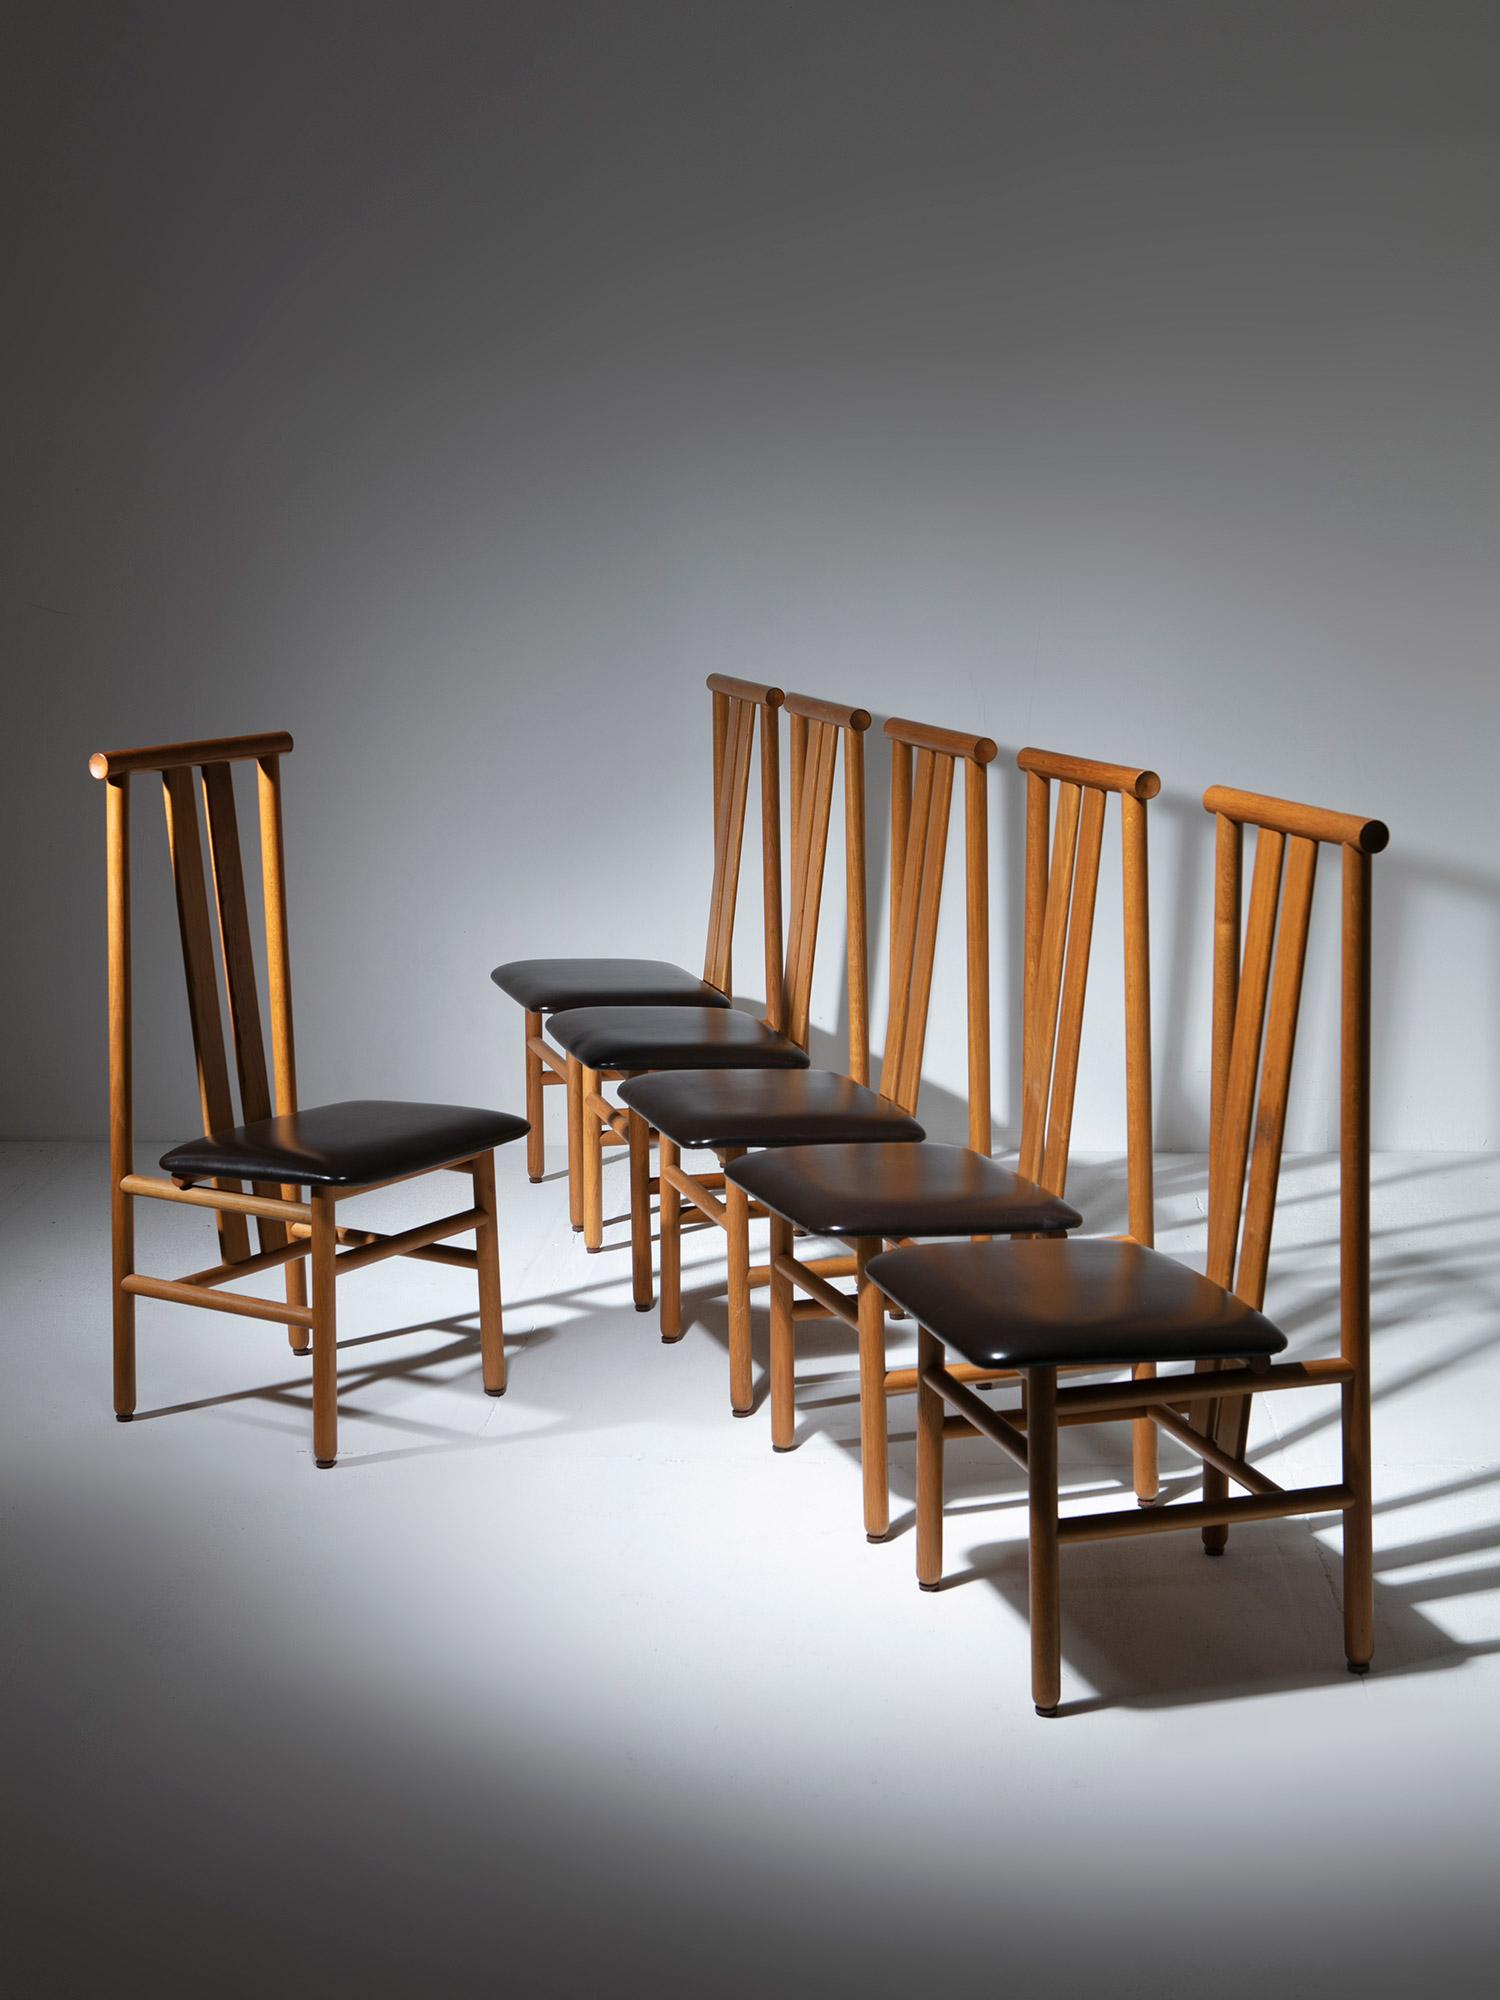 Set of six Zea dining chairs by Annig Sarian for T70.
Solid ash wood frame with sculptural backrest.